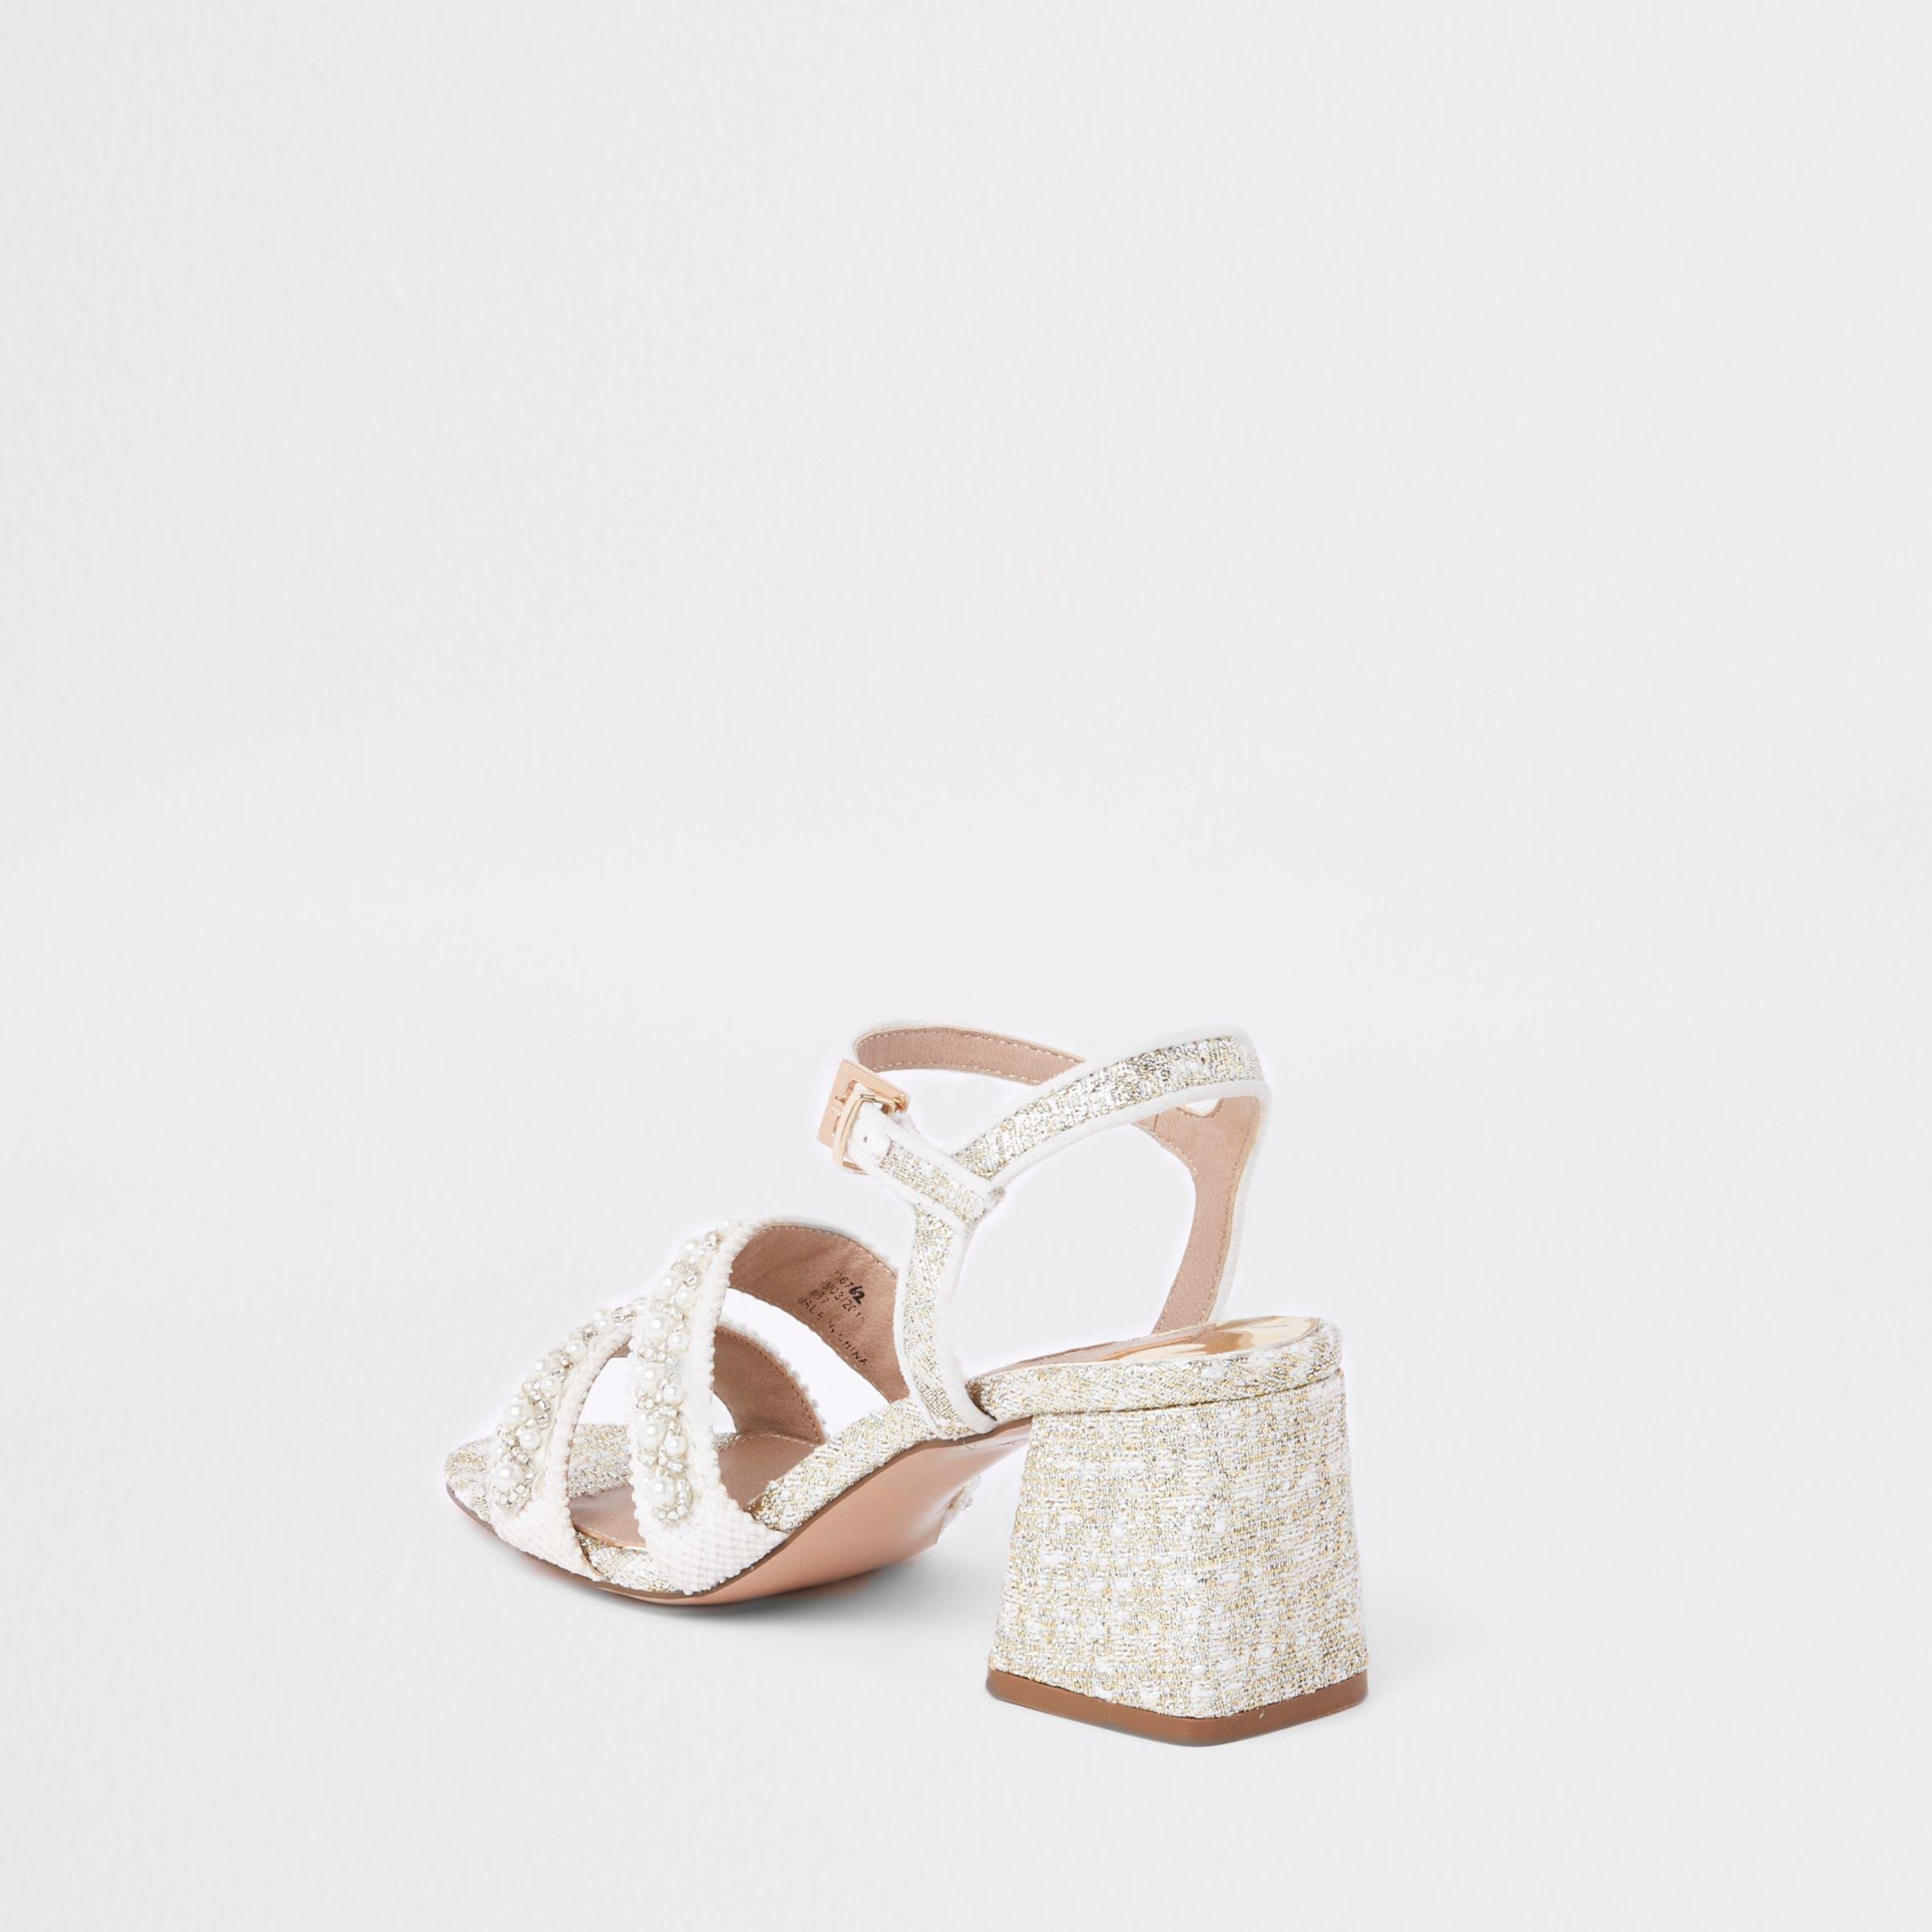 River Island Suede Textile Pearl Block Heel Sandals in White - Lyst